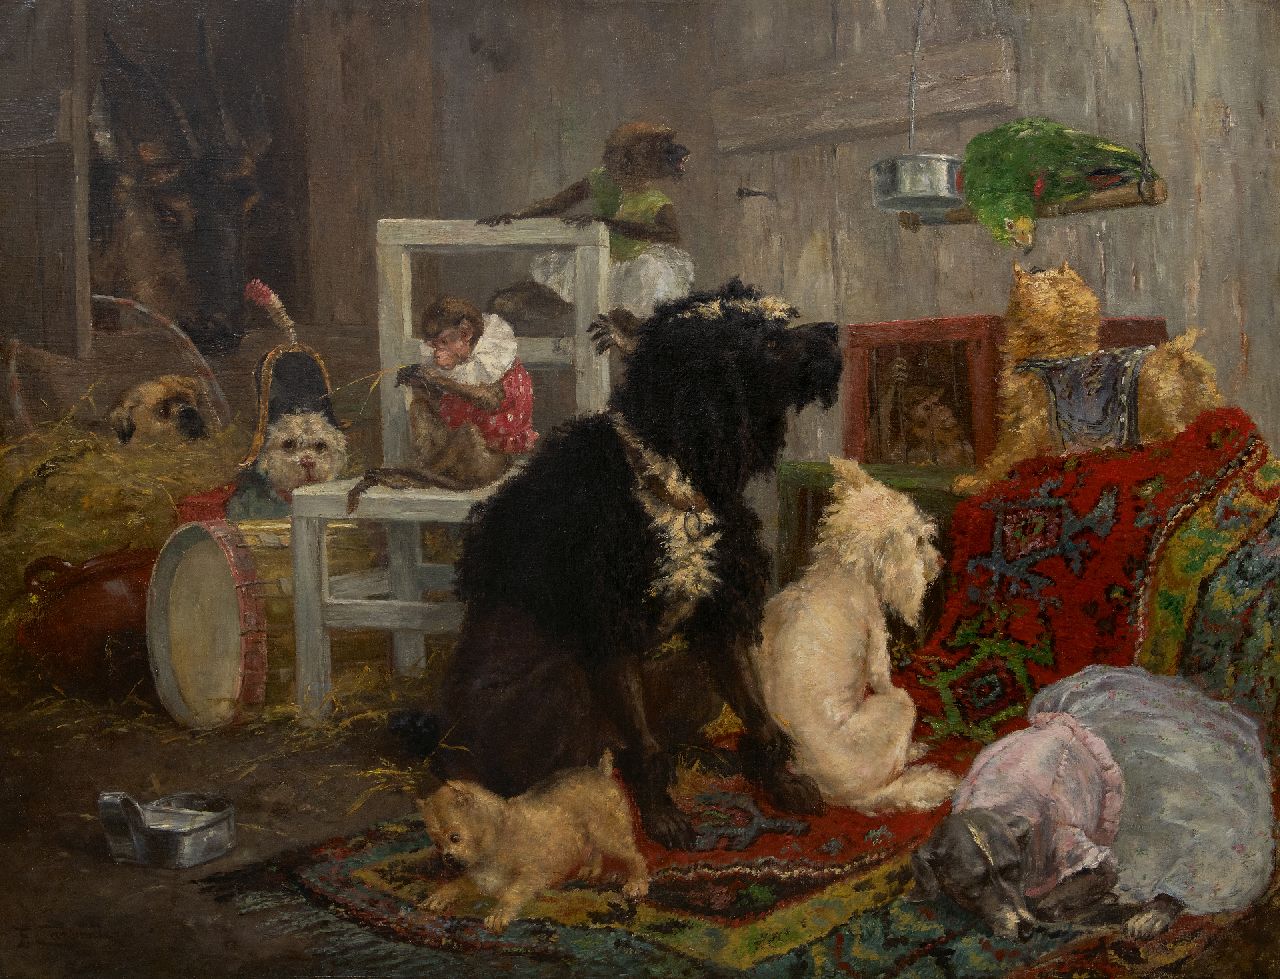 Carpentero F.  | Fritz Carpentero | Paintings offered for sale | Before the circus performance, oil on canvas 100.5 x 130.0 cm, signed l.l.